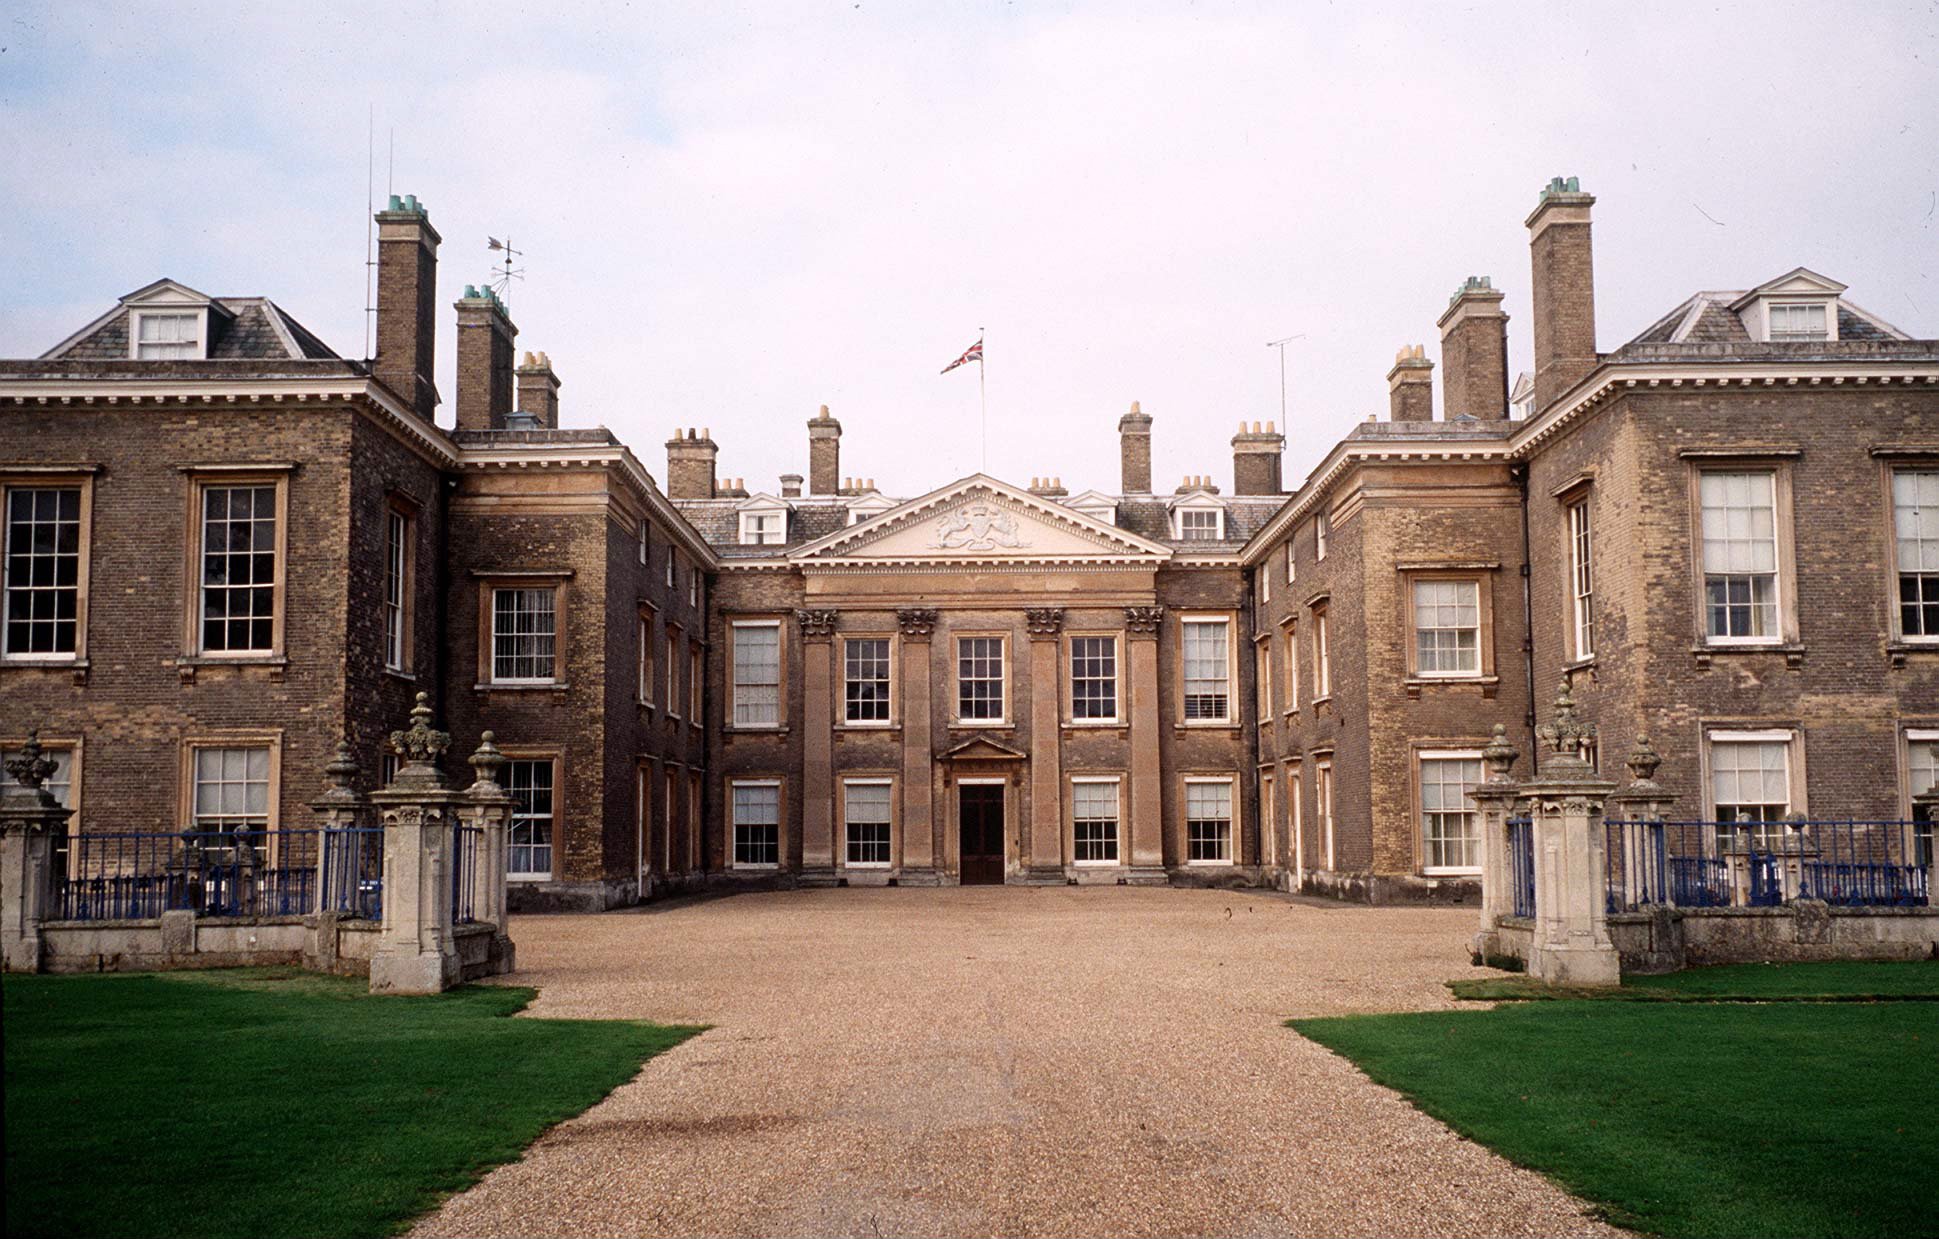 A front view of the Spencer family home Althorp House situated in Northamptonshire. / Source: Getty Images